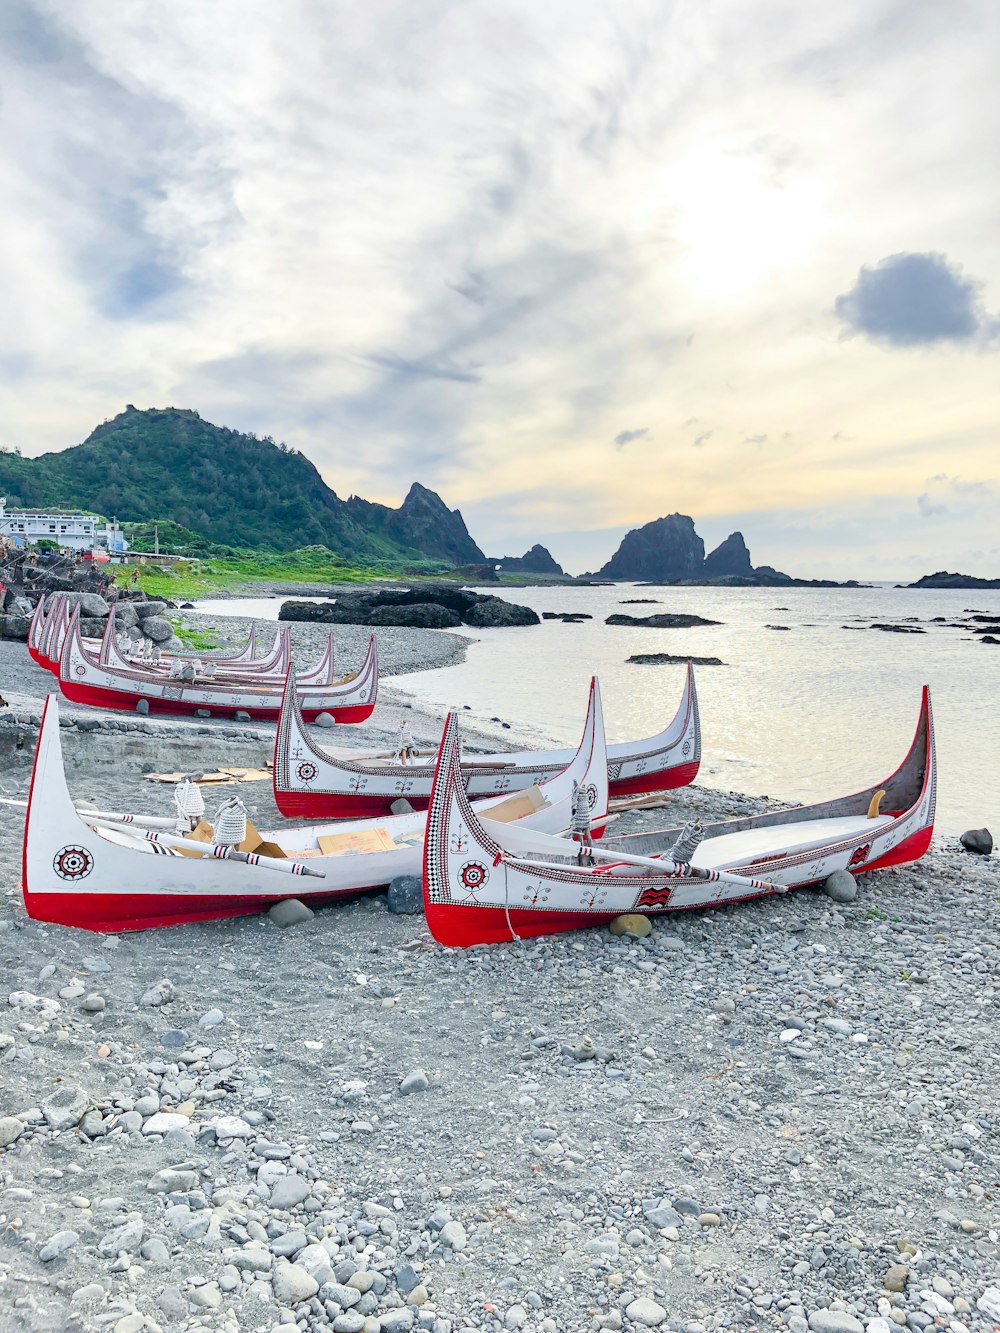 white and red boat on beach during daytime